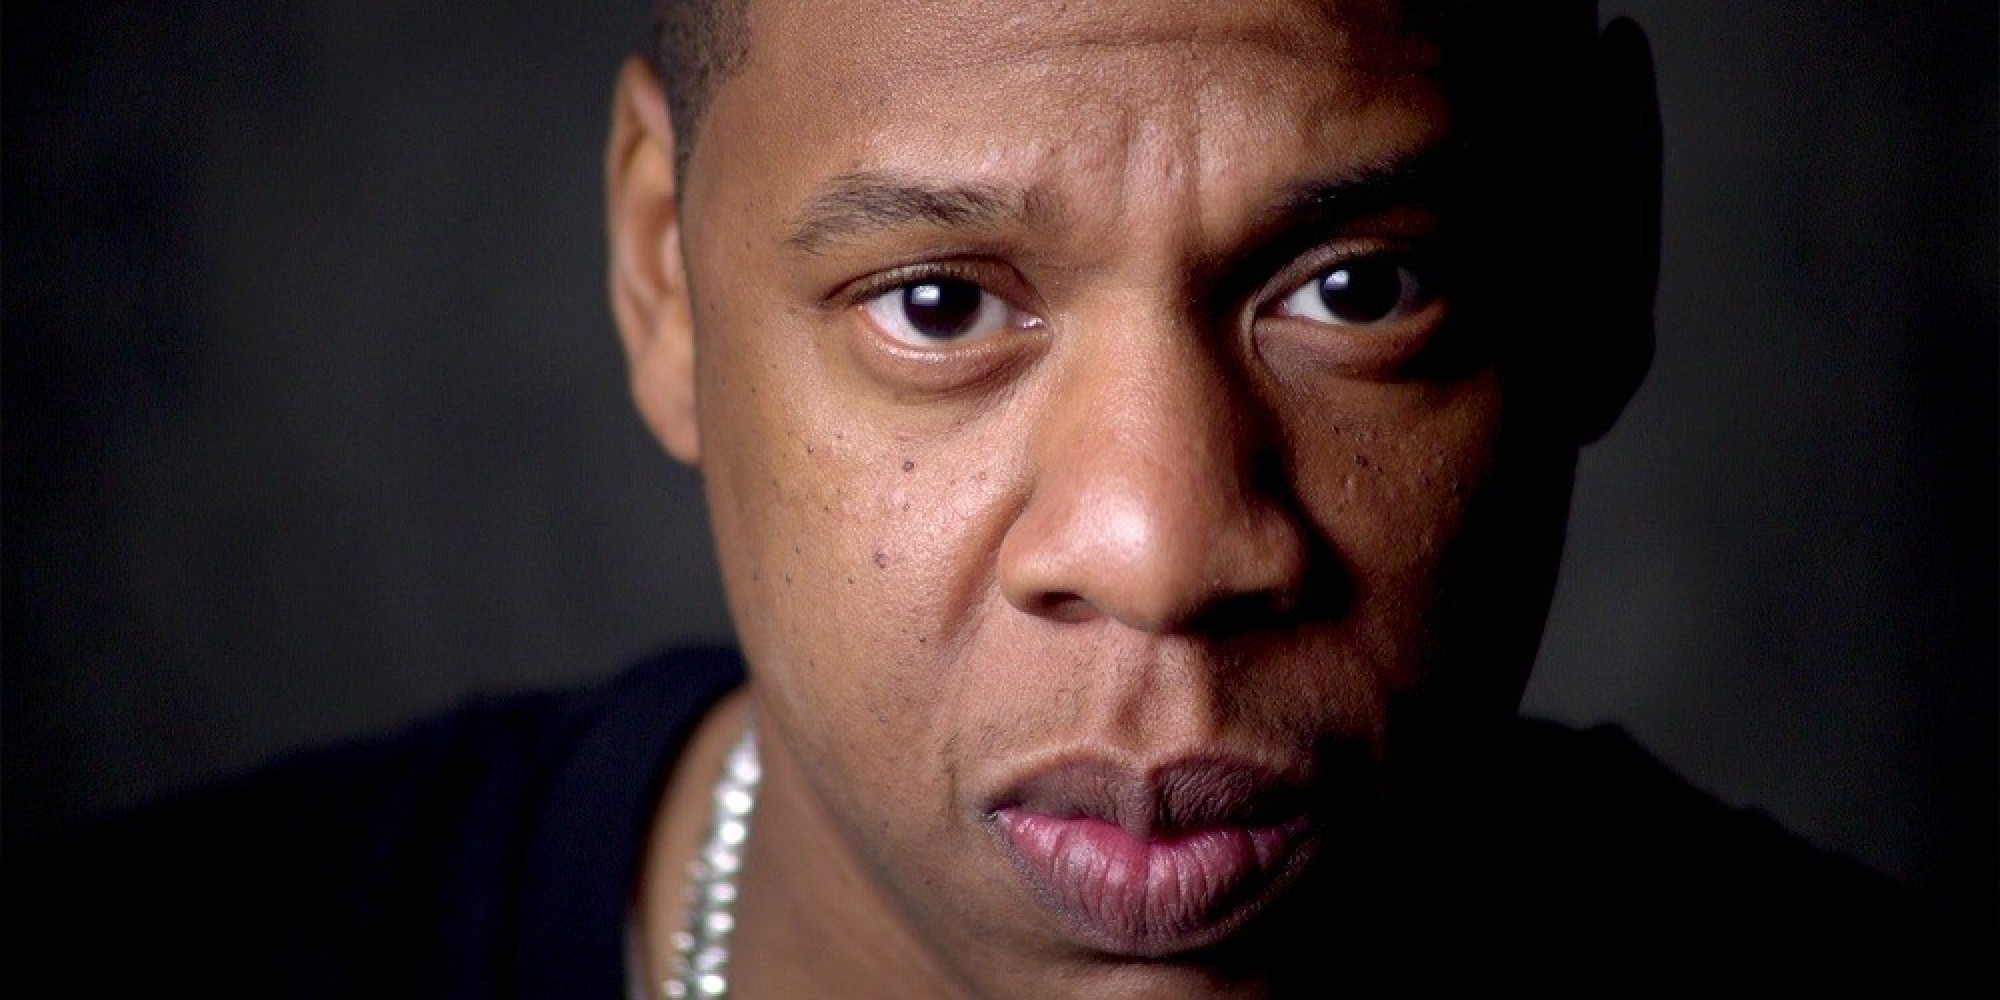 jay z discography torrent